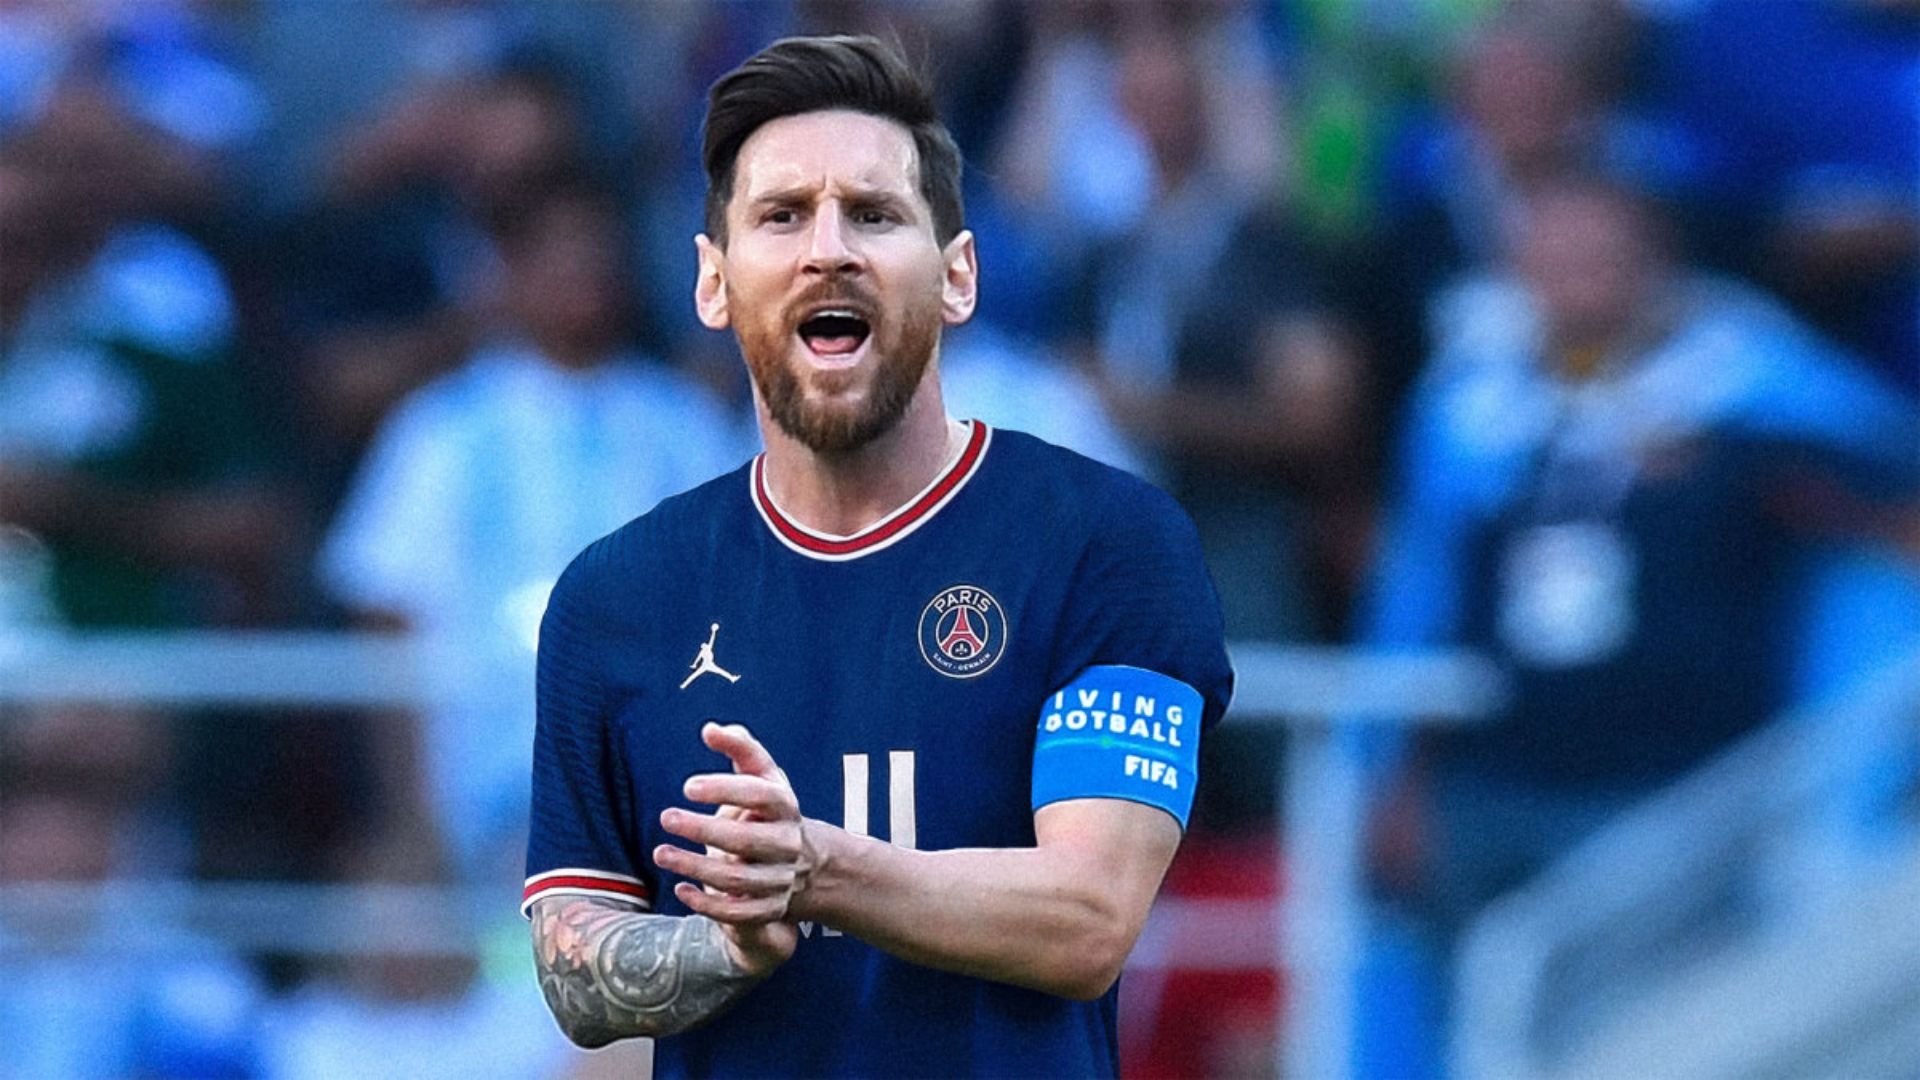 "Breaking: Lionel Messi Cleared to Play for PSG on Saturday After Suspension Shortened - Sources